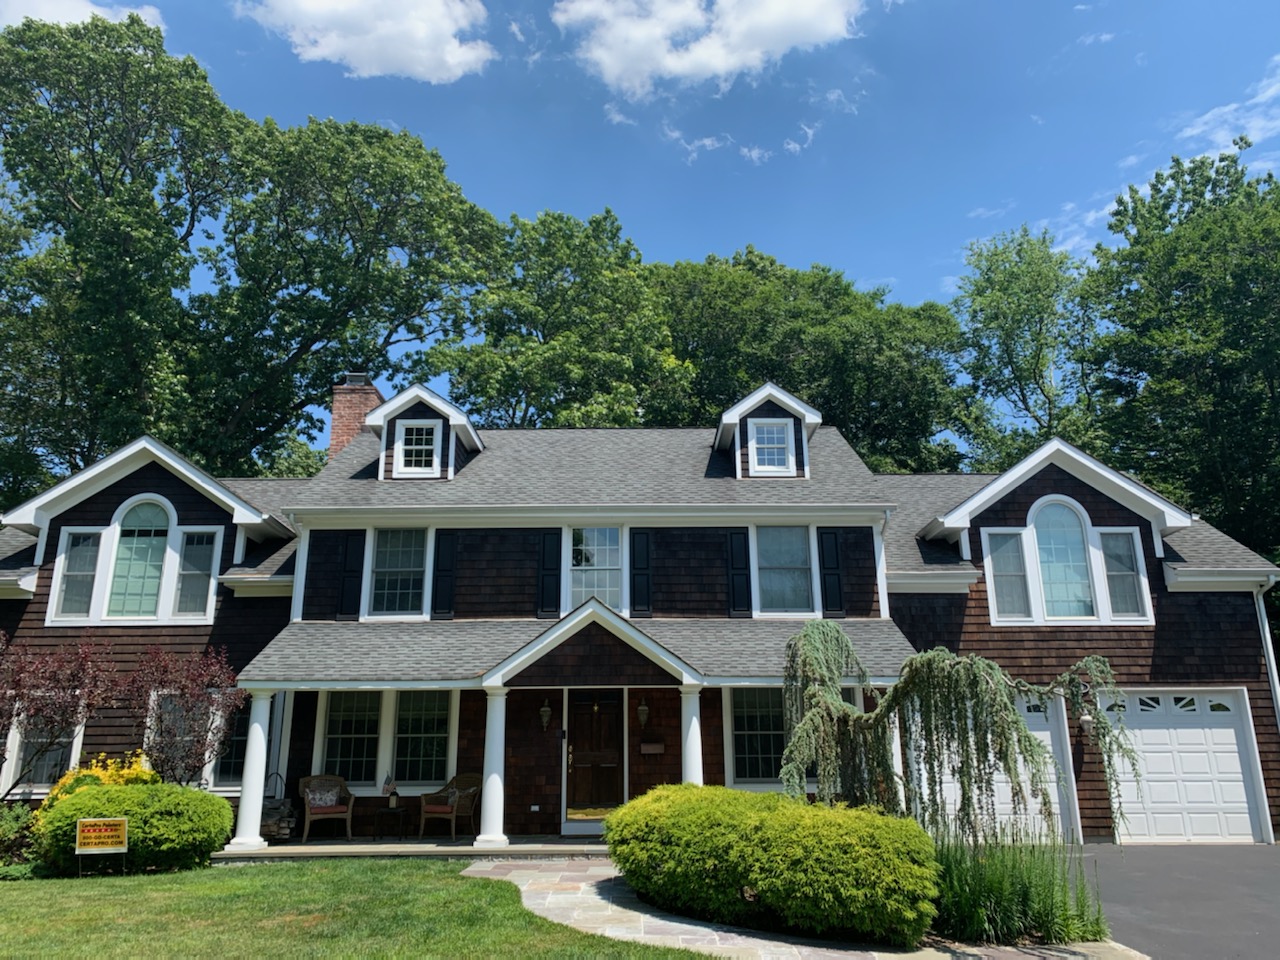 Roslyn, NY – House Staining After